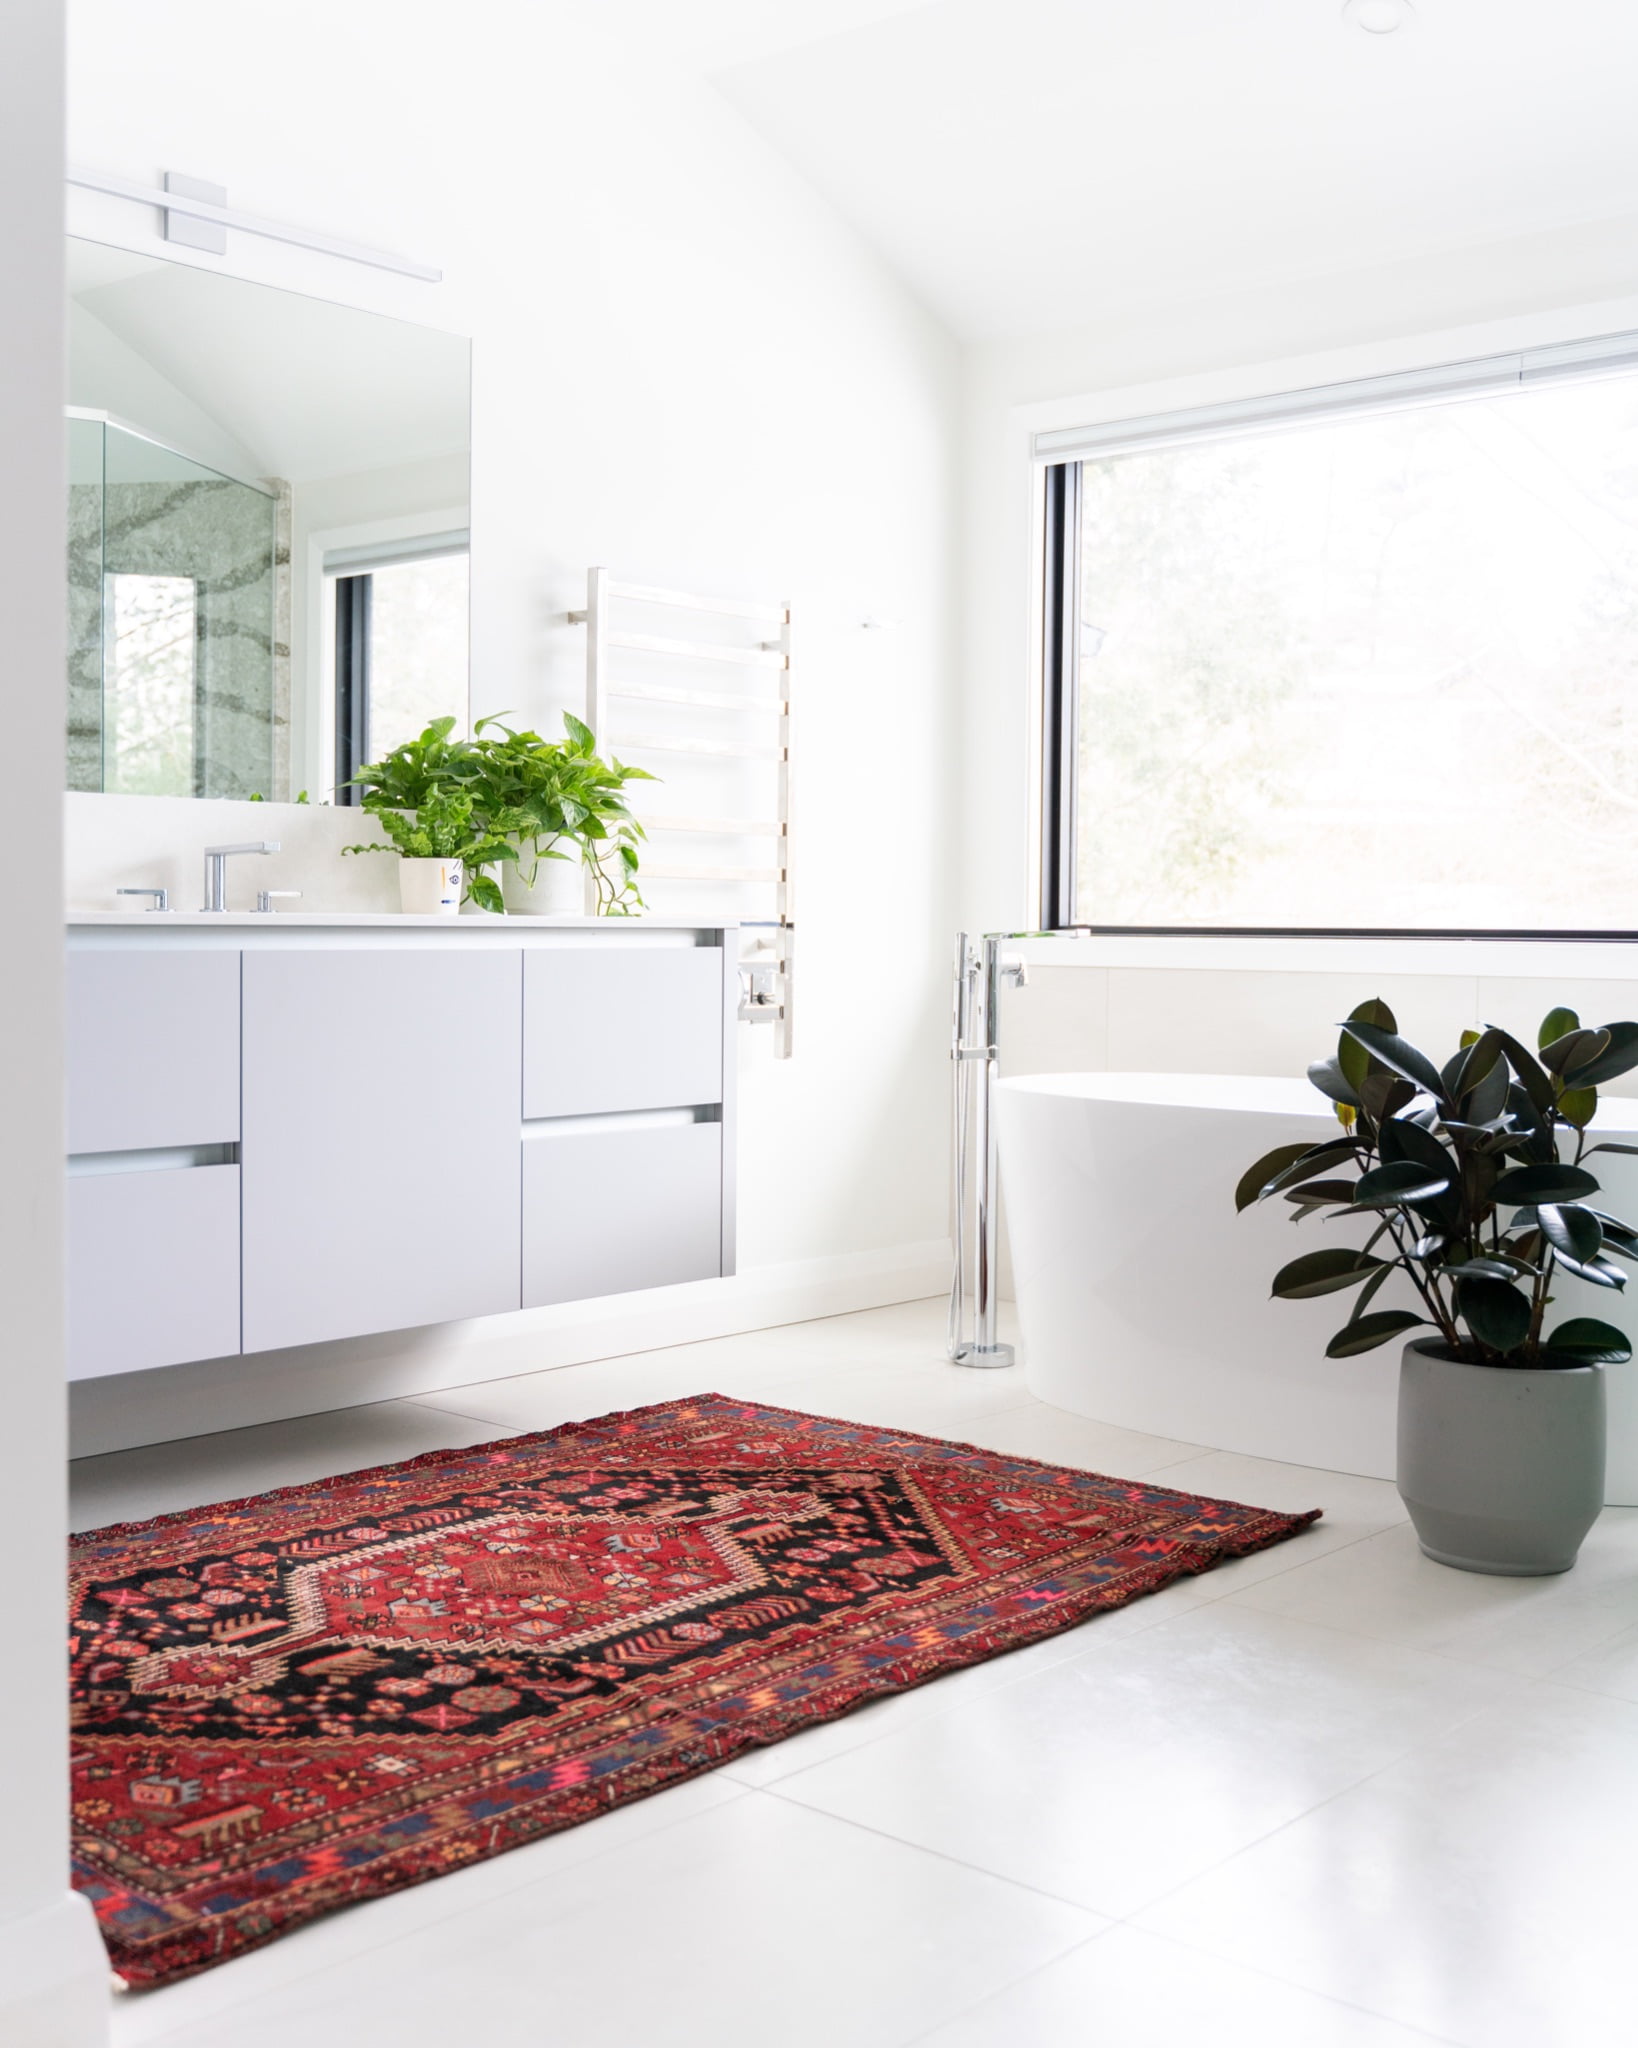 putting red rug in bathroom as one of simple design ideas 